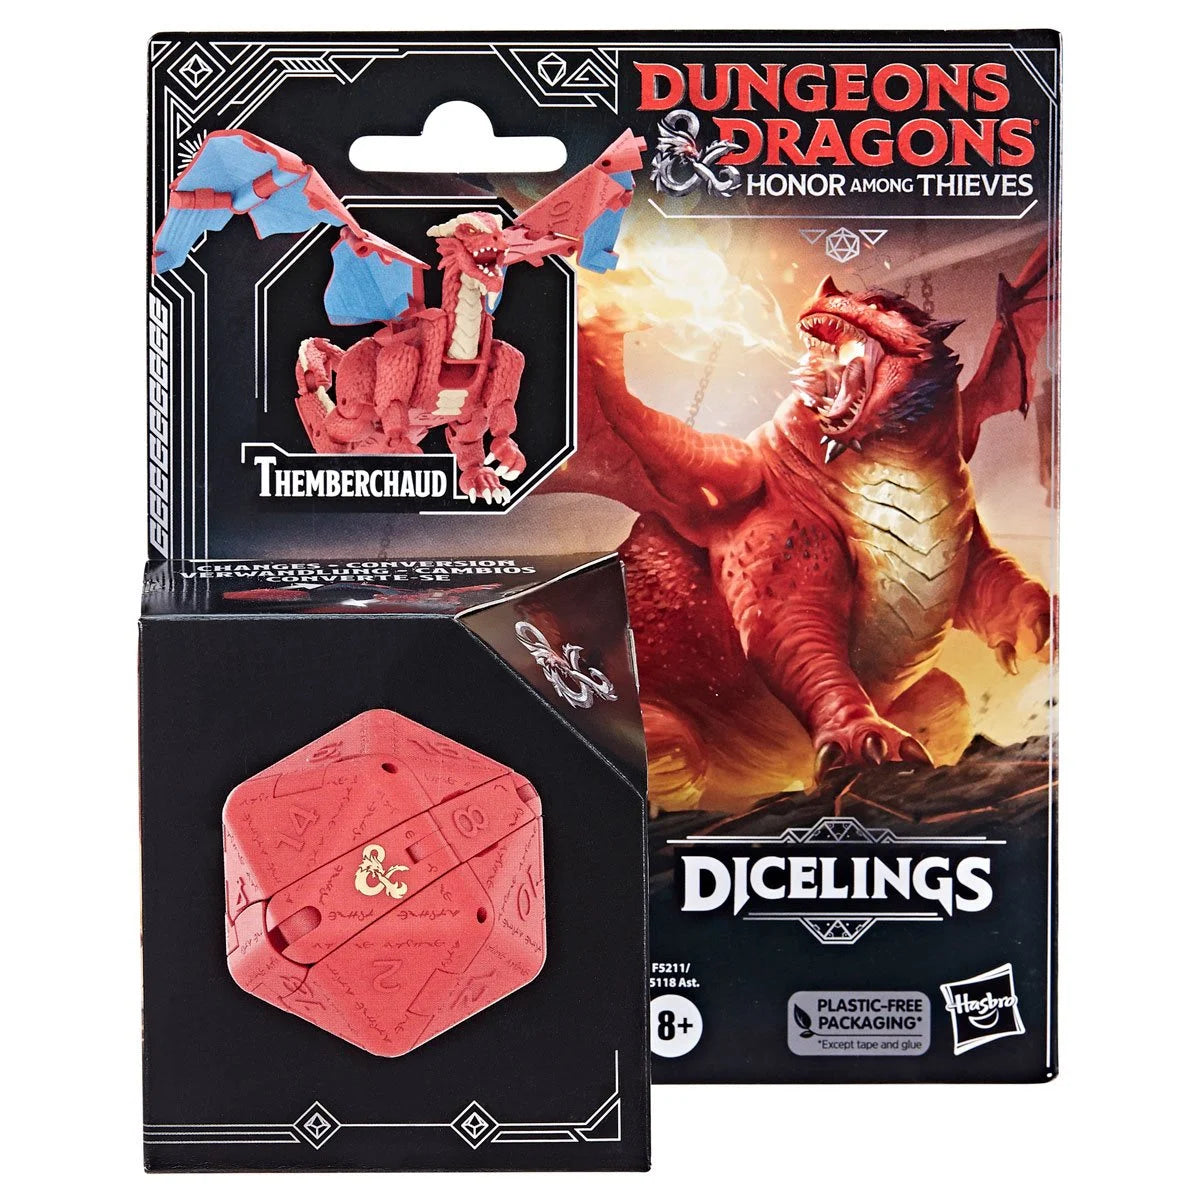 Dungeons & Dragons Honor Among Thieves Dicelings Red Dragon Figure